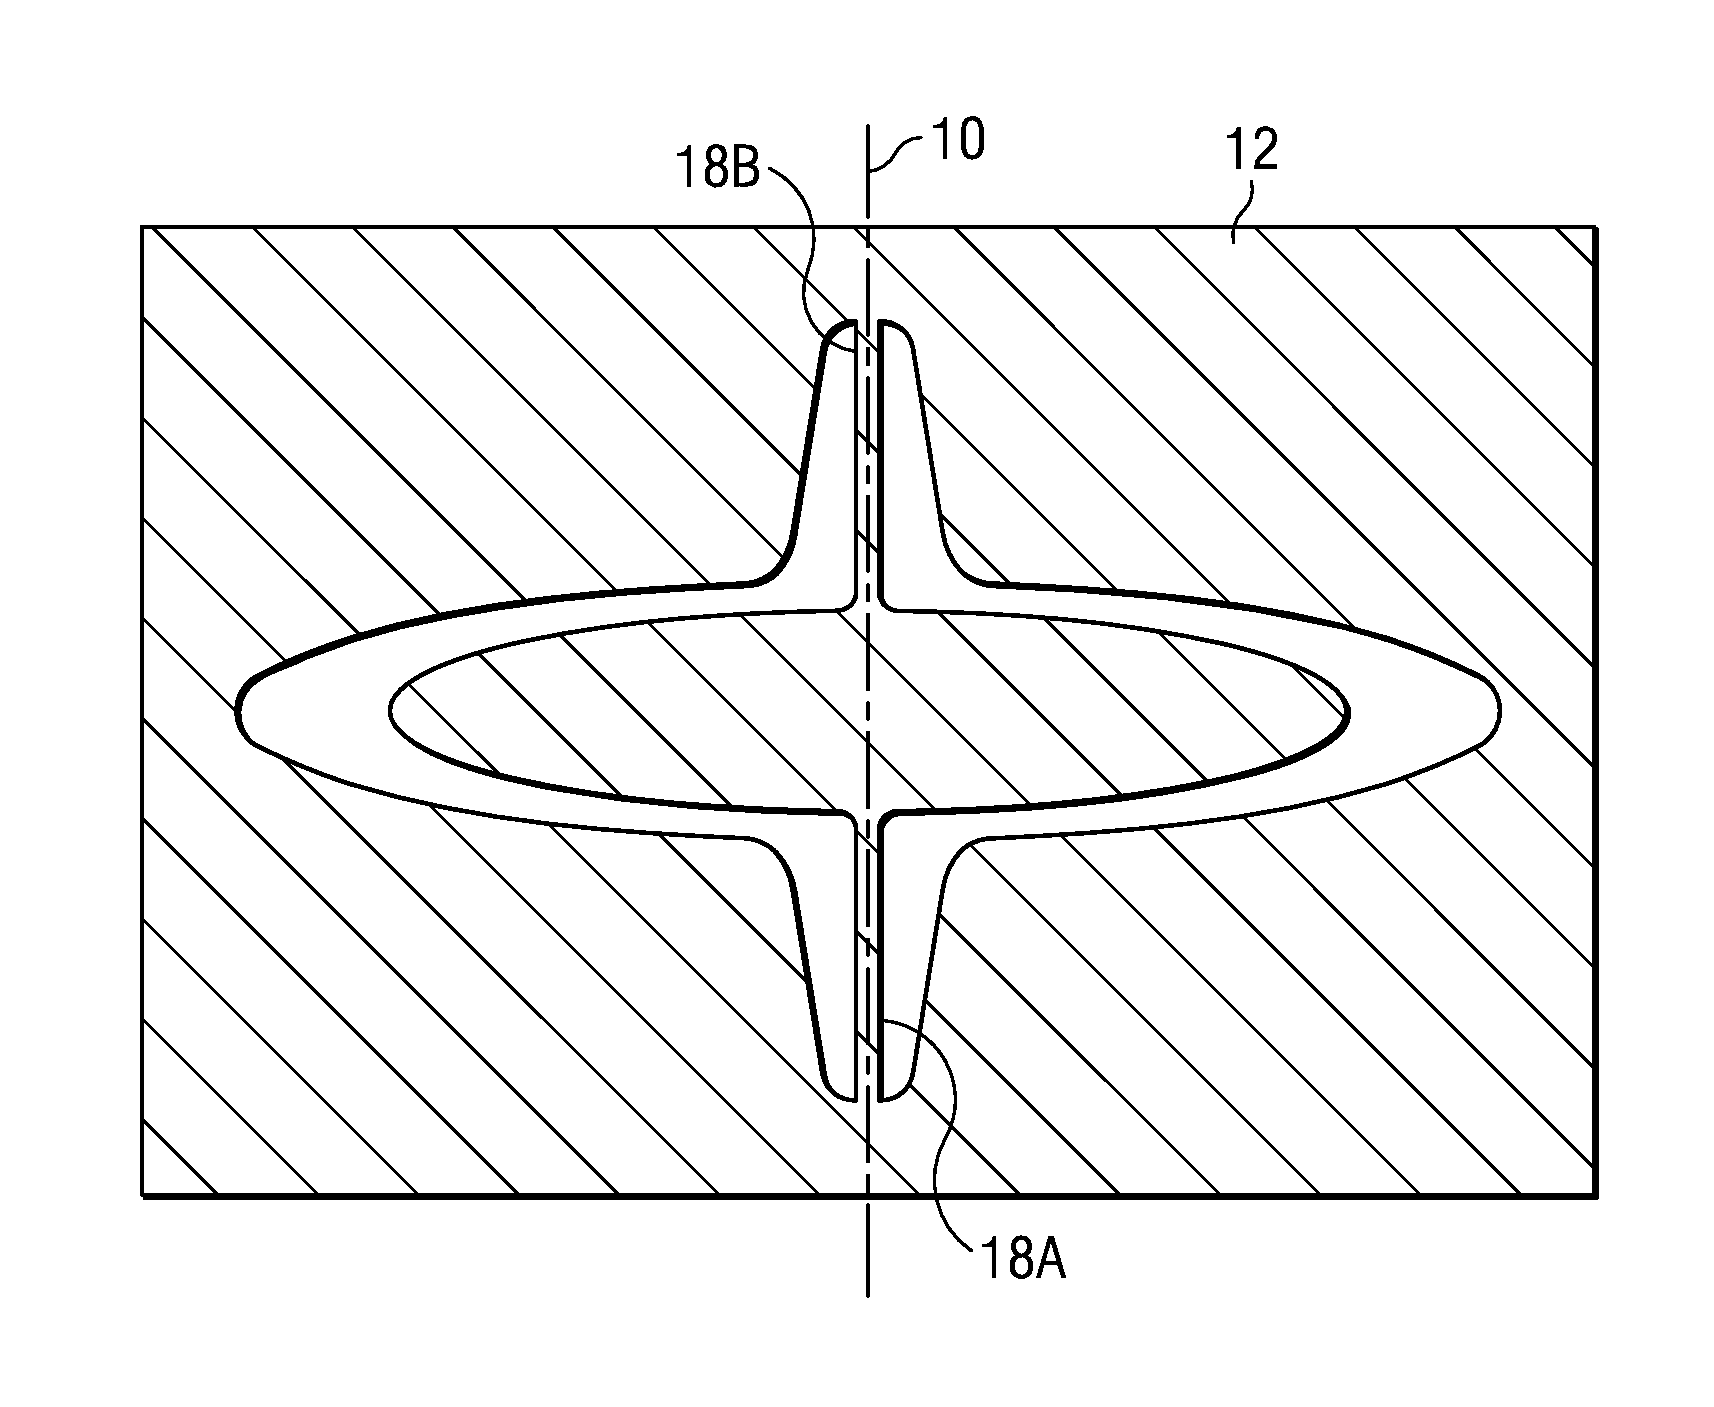 Apparatus and methods for rapidly bringing a scanning mirror to a selected deflection amplitude at its resonant frequency